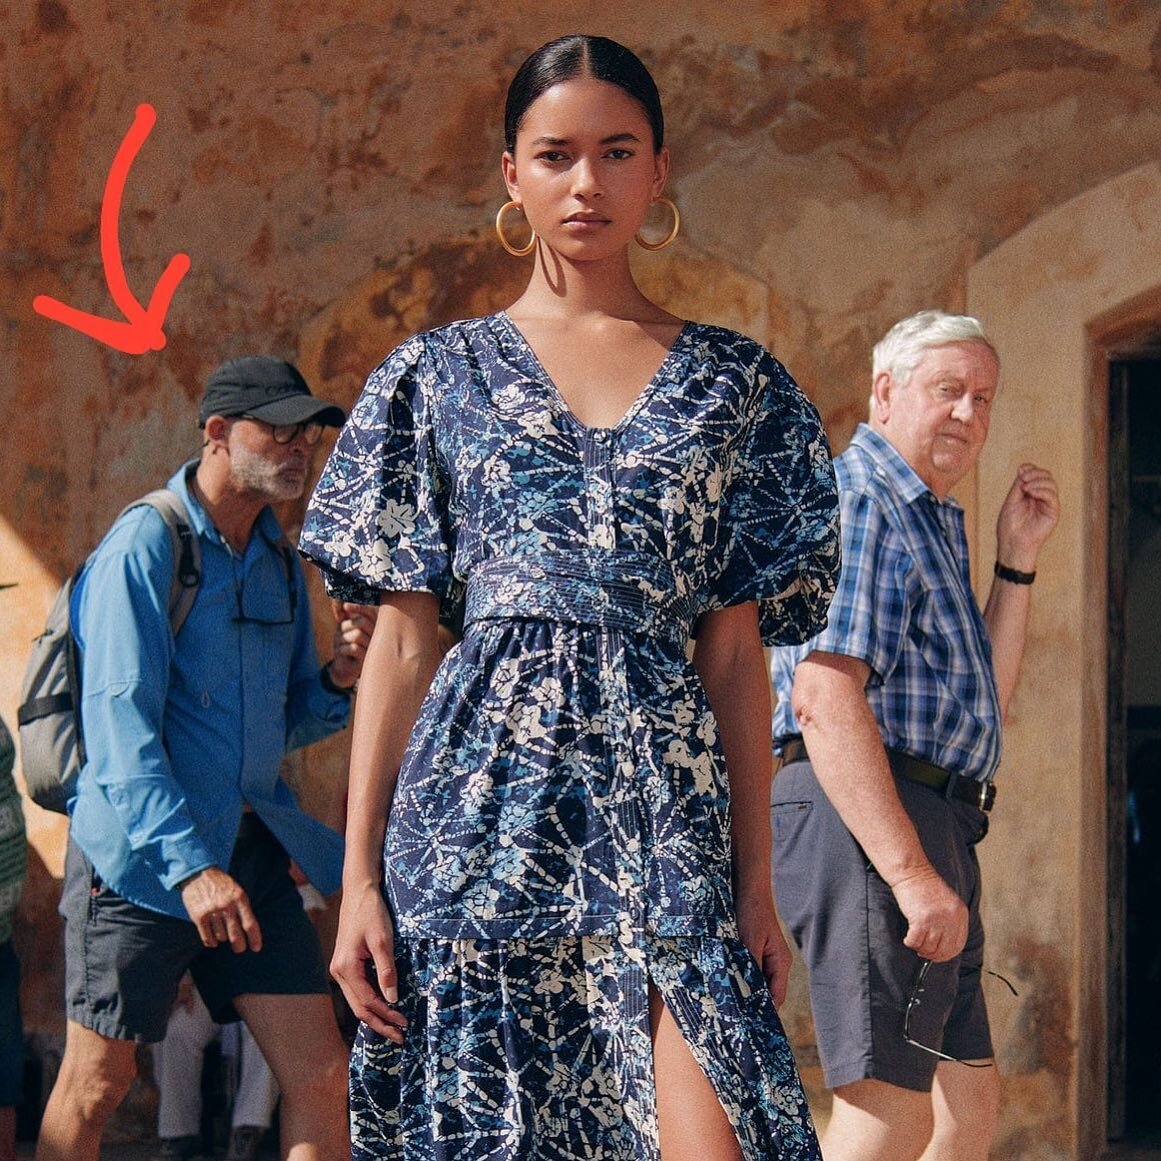 Wanted for egregious photobombing @edwindavidstudio 

From our recent work ❤️with @_marieoliver_ 

#model #photography #production #locationservices #puertorico #fashion #cereprods